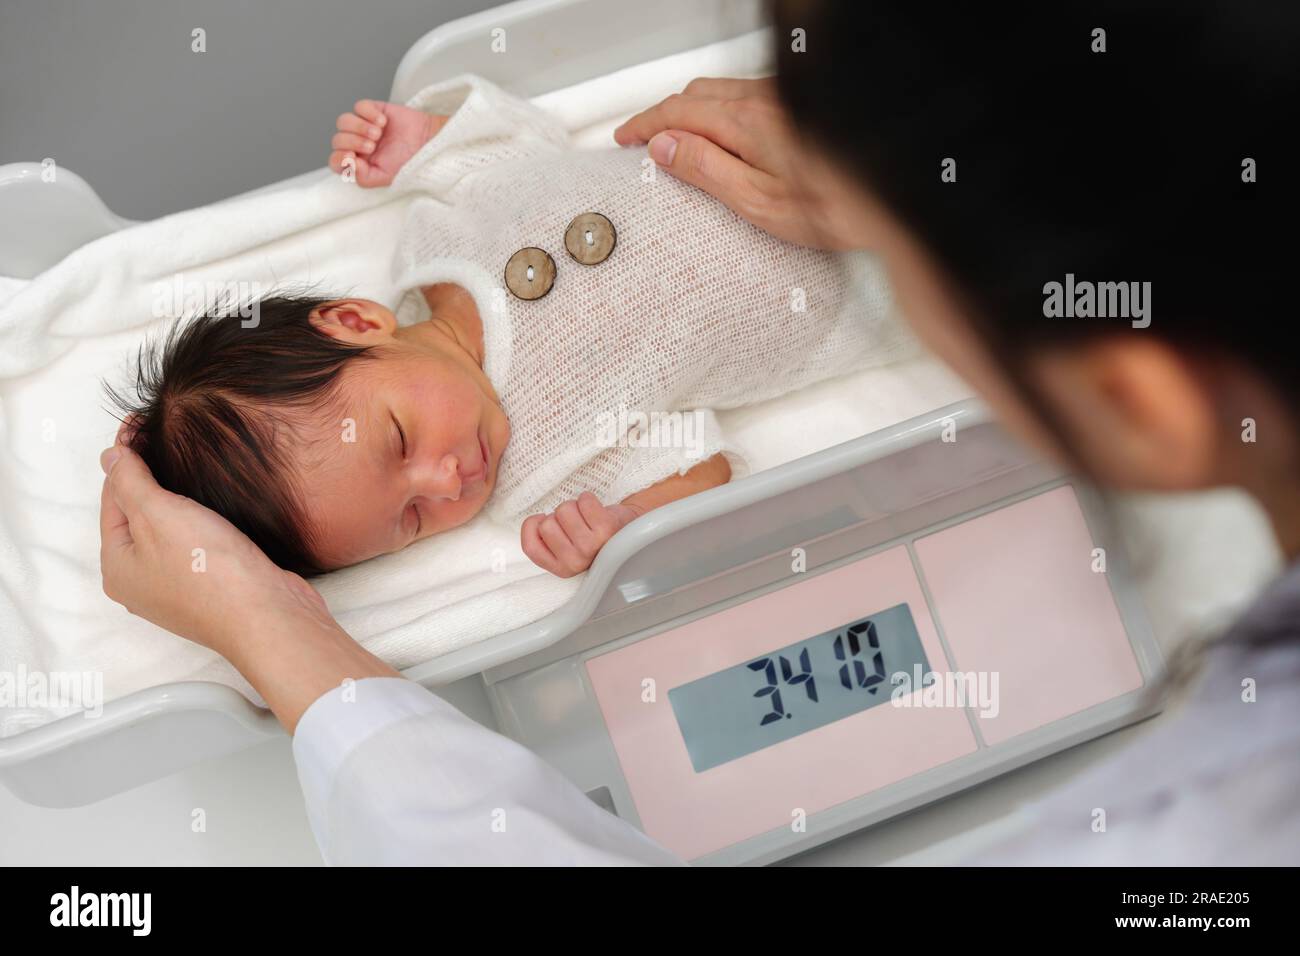 Newborn Baby On Scale. Physical Development Concept Photo Of Child Health  Care. Copy Space Stock Photo, Picture and Royalty Free Image. Image  45837323.